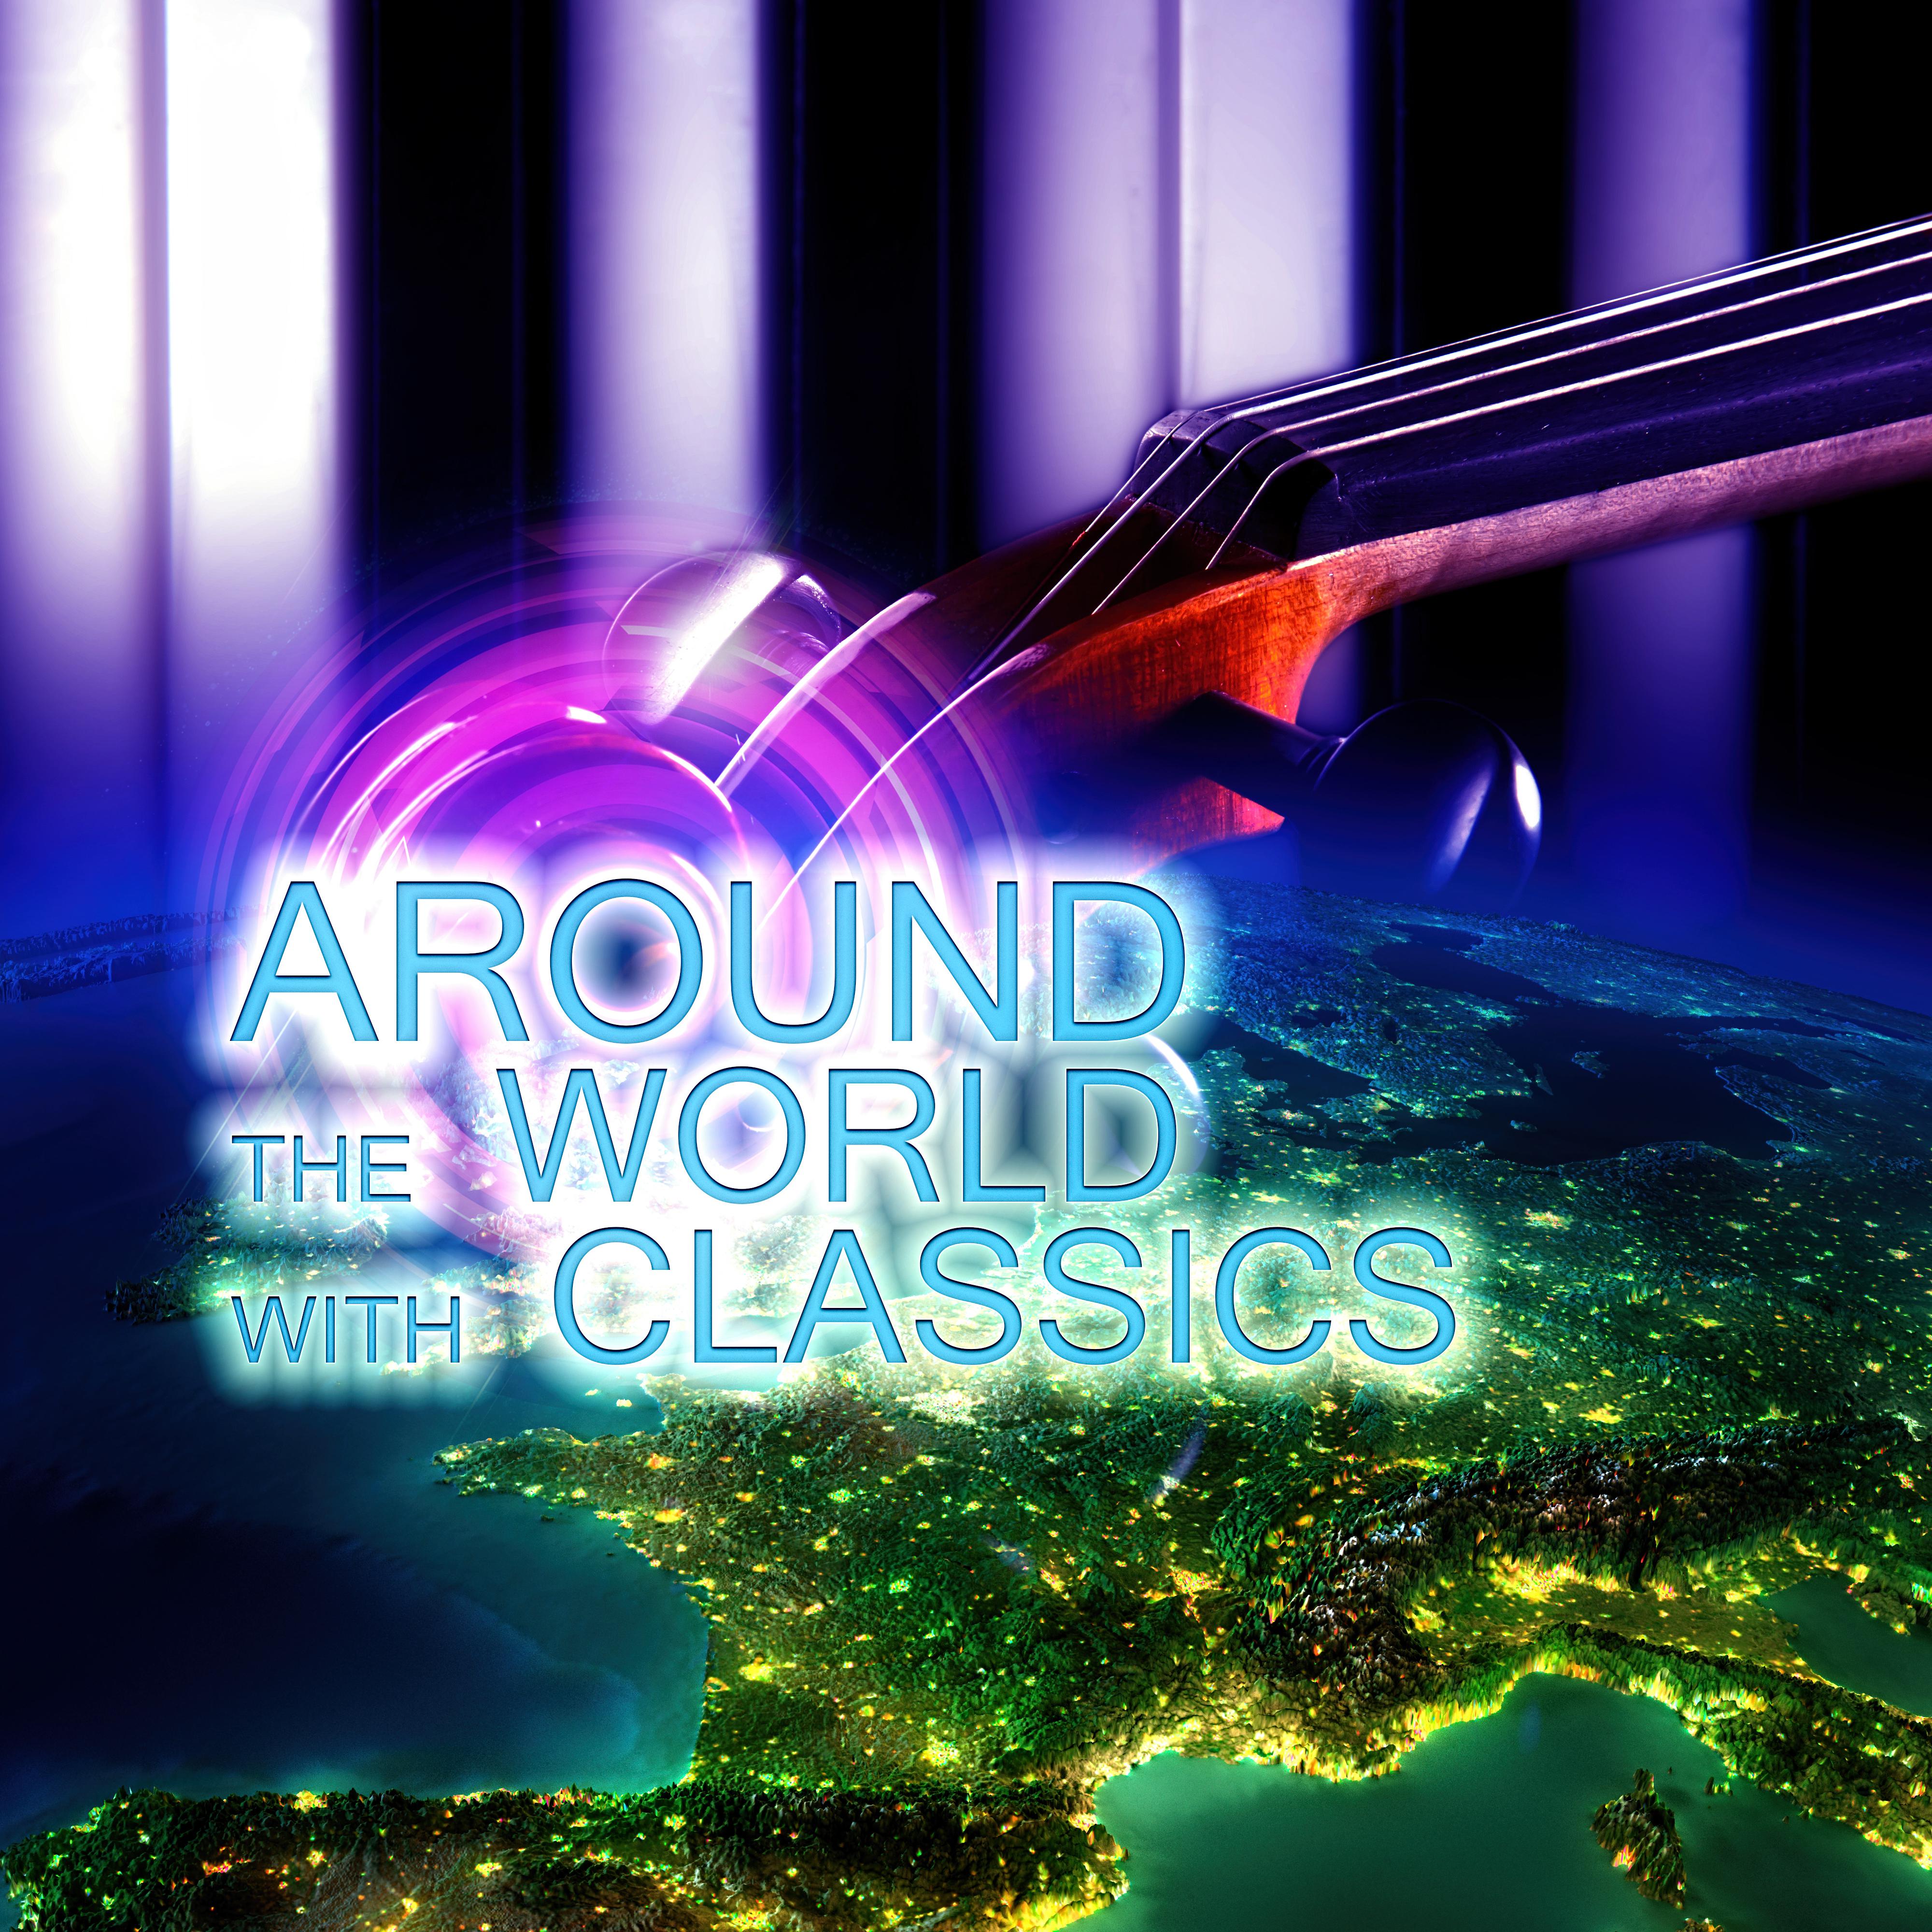 Around the World with Classics – Friendly Attiude to the World with Classical Music, Brilliant Music, Beautiful Moments with Classics for Serenity, World Music for Everyone, Inner Peace